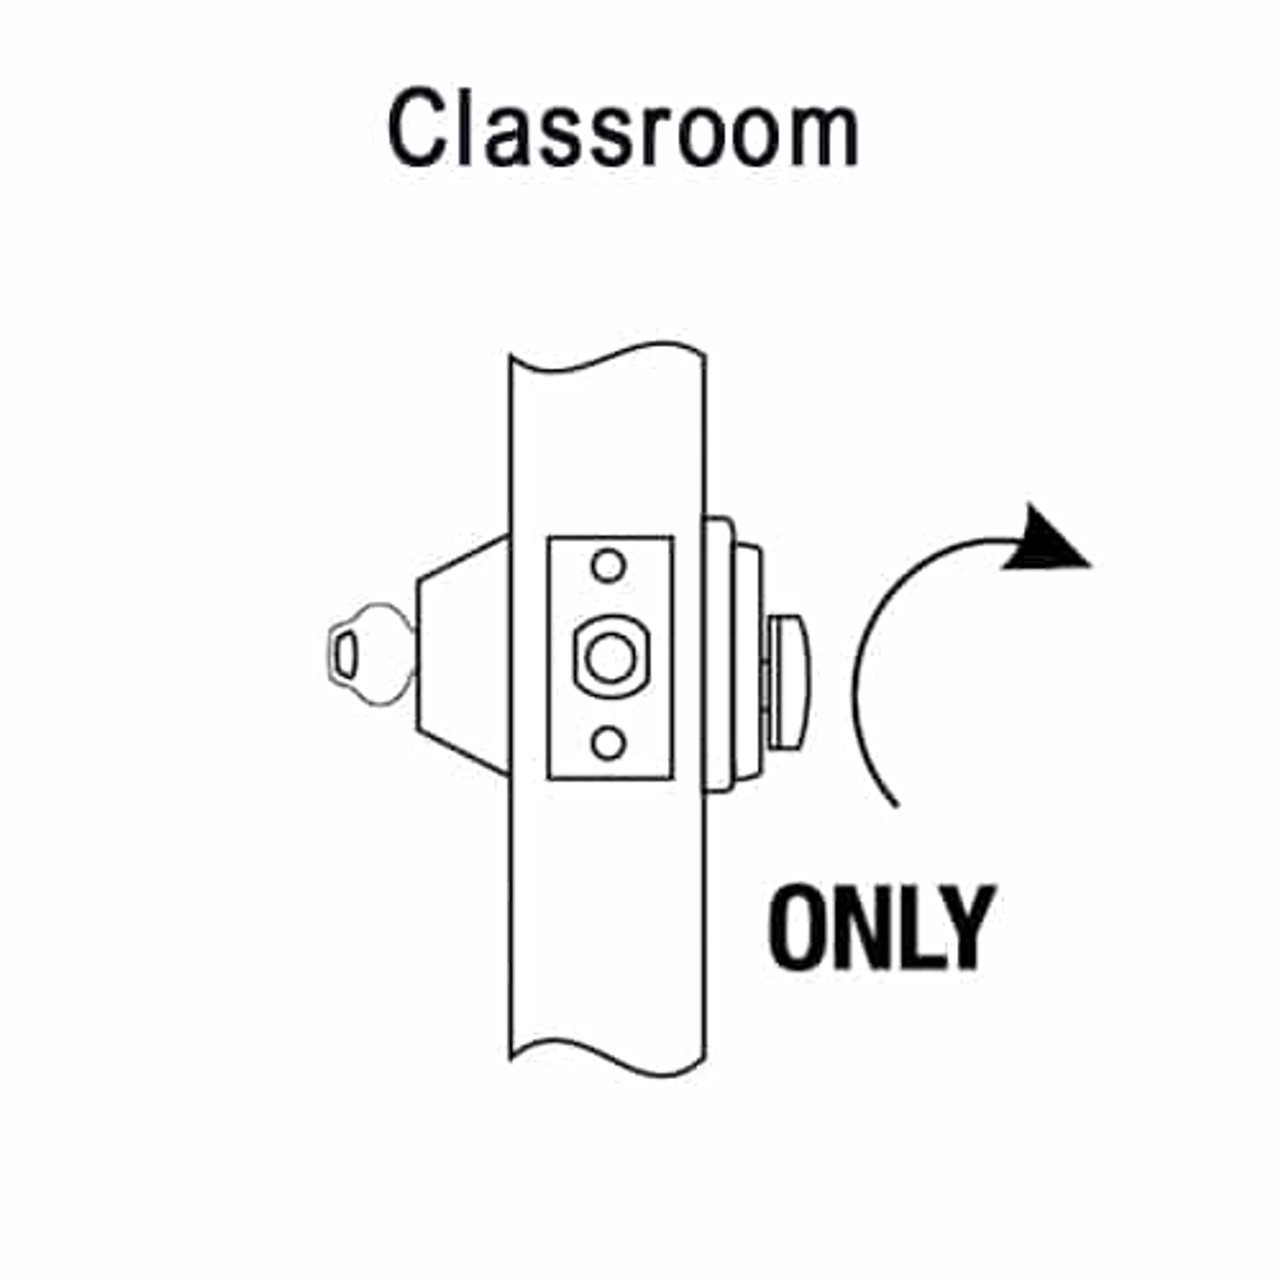 DL3217-605-CL7 Corbin DL3200 Series Classroom Cylindrical Deadlocks with Single Cylinder in Bright Brass